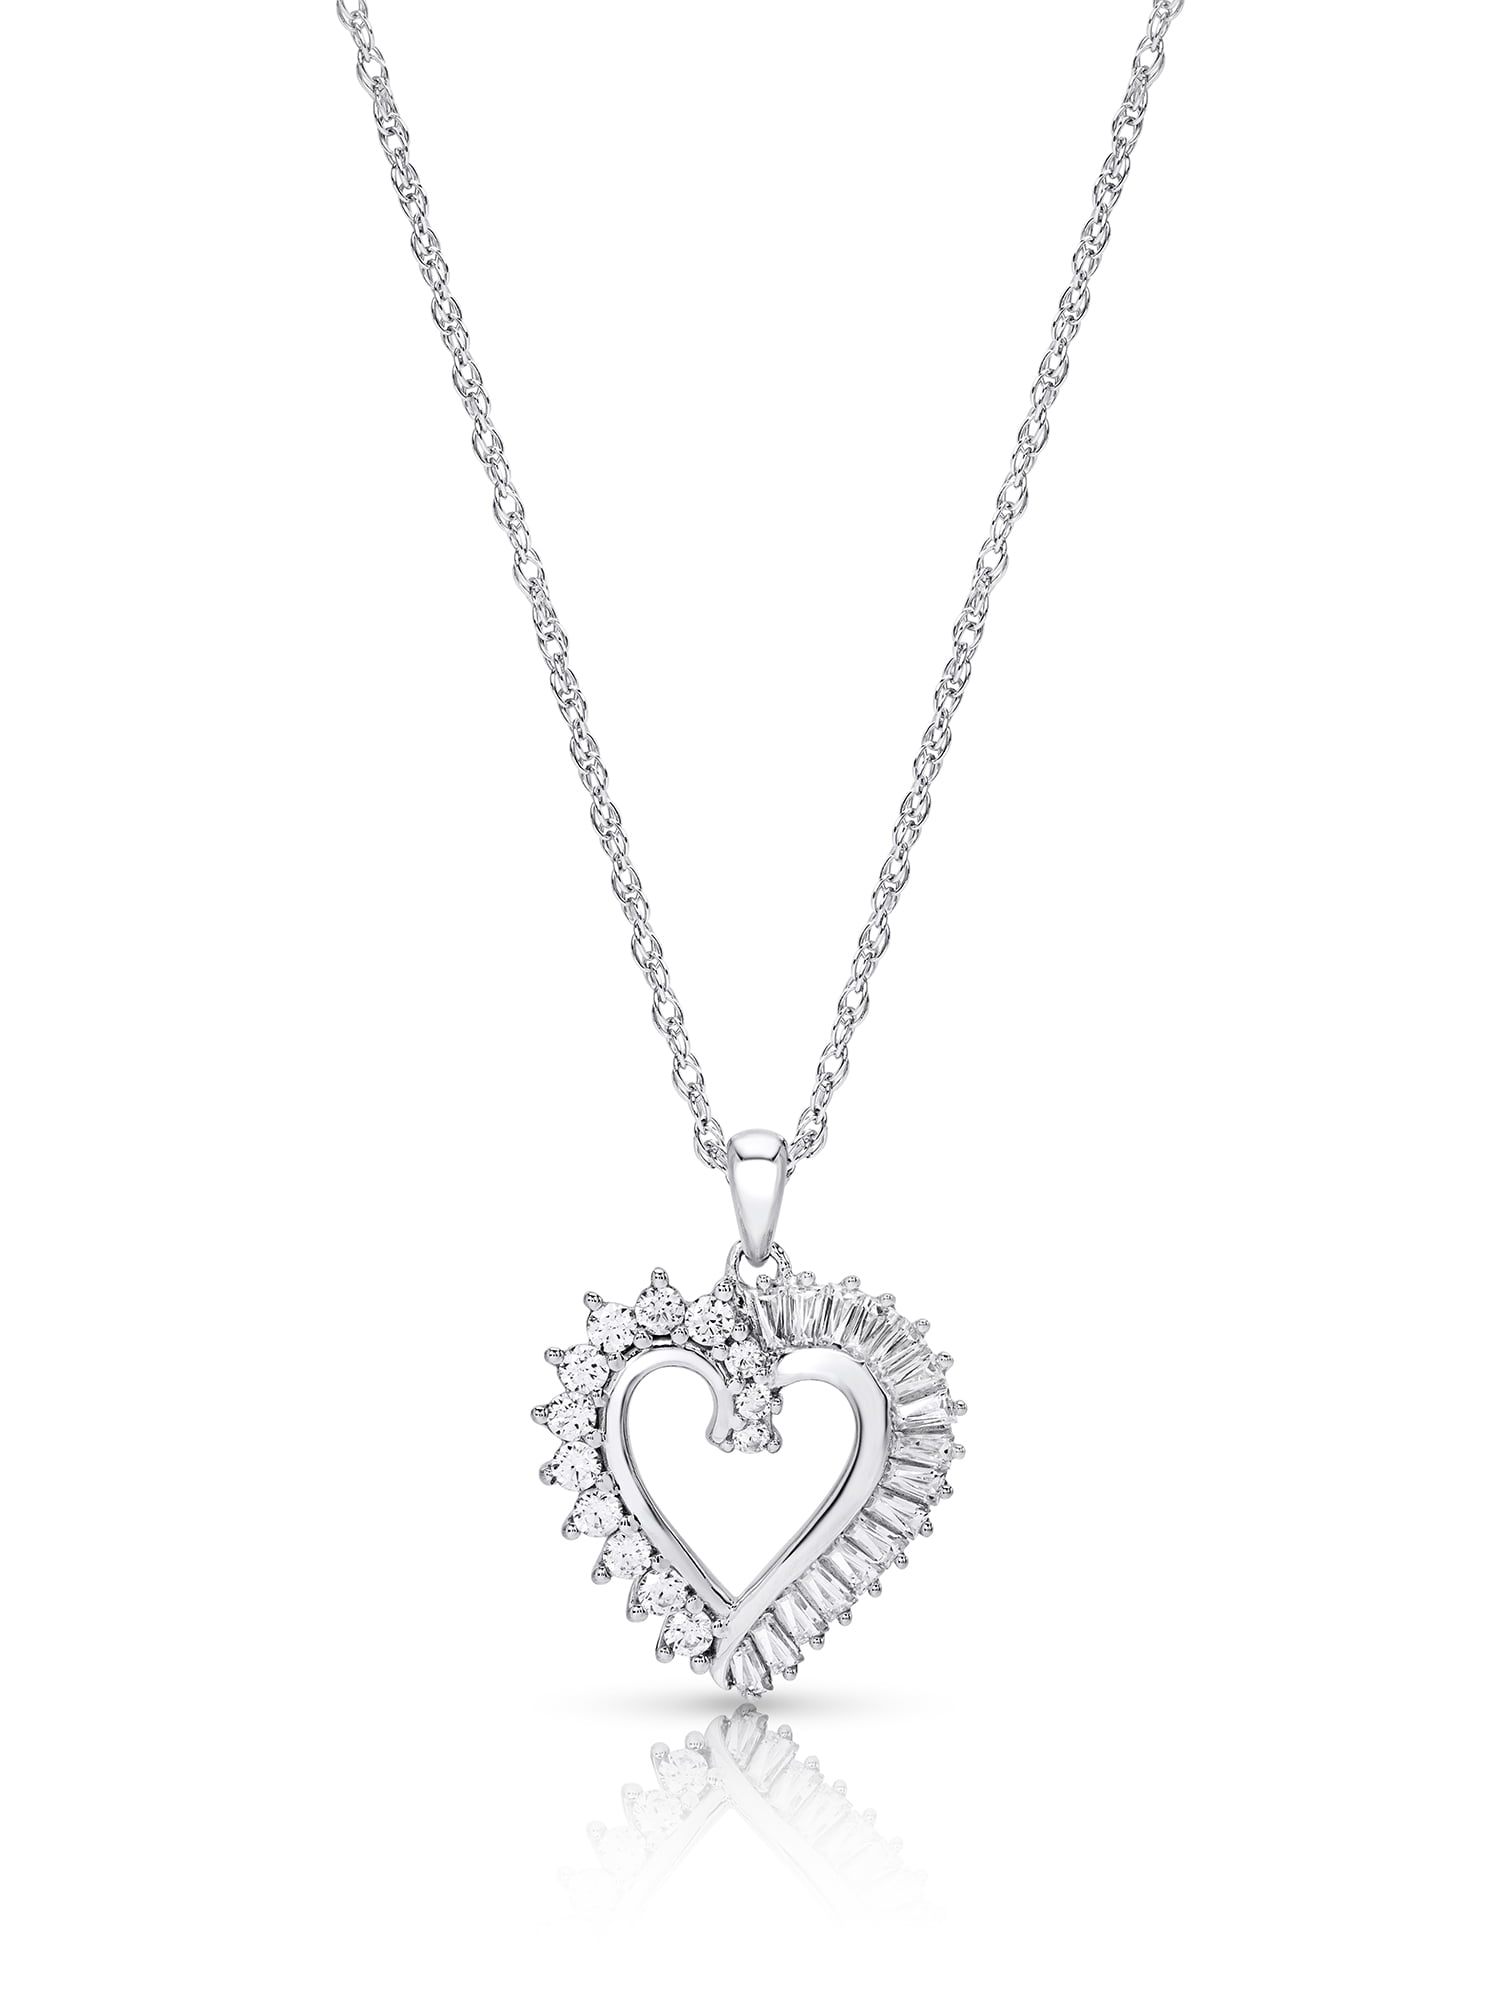 Girl Gift White Heart AAA Zircon Sterling 925 Silver Charm Pendant Necklace CH69